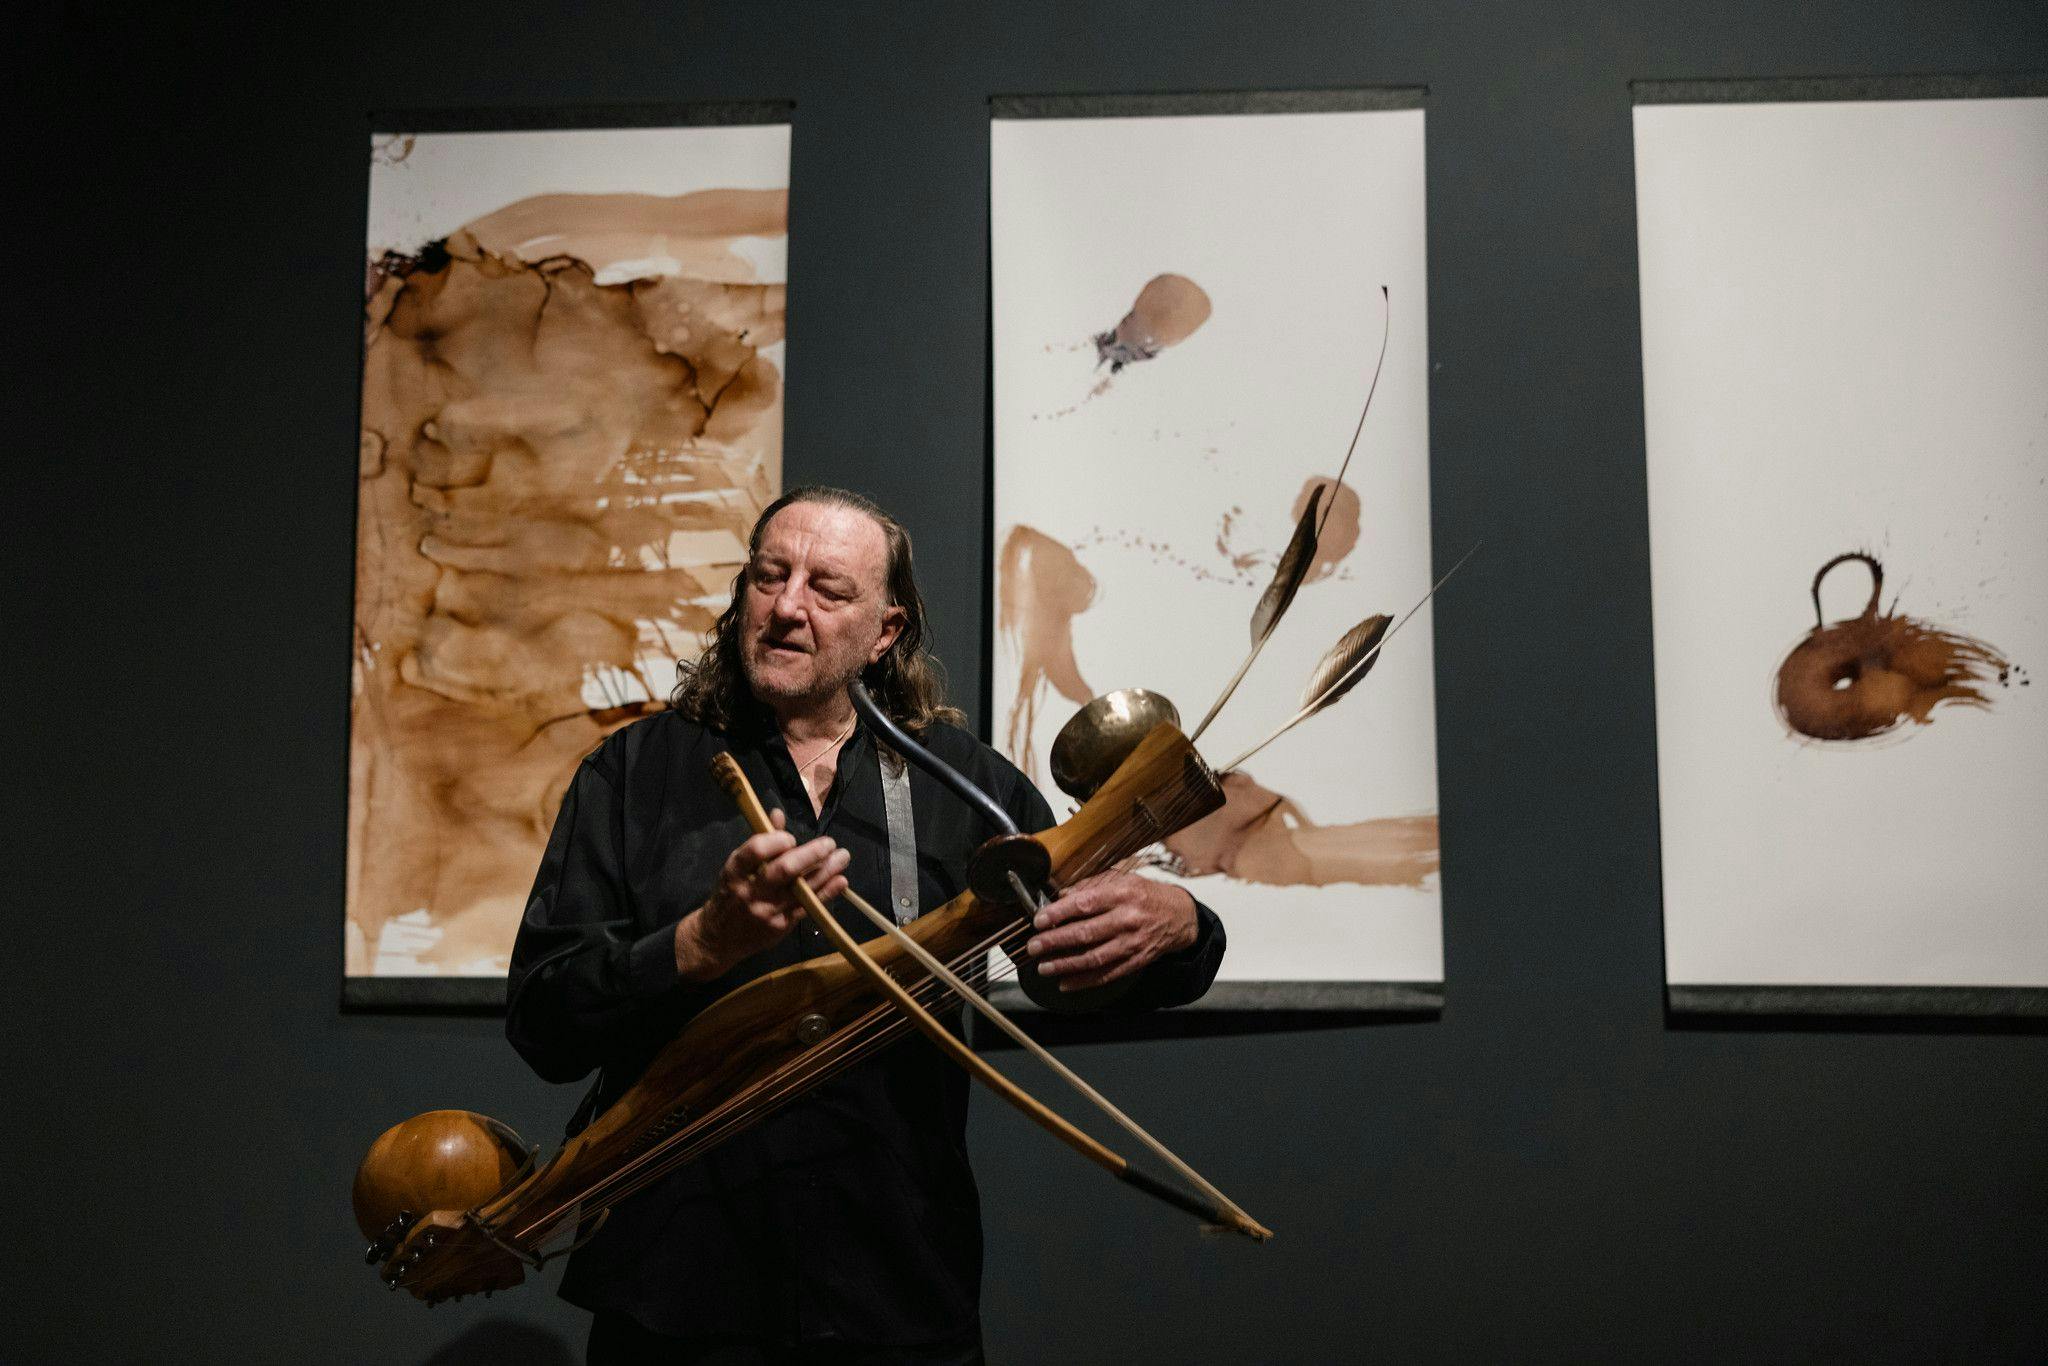 Colin Offord in the gallery playing one of his self made instruments of strings wood, feathers and a bow.